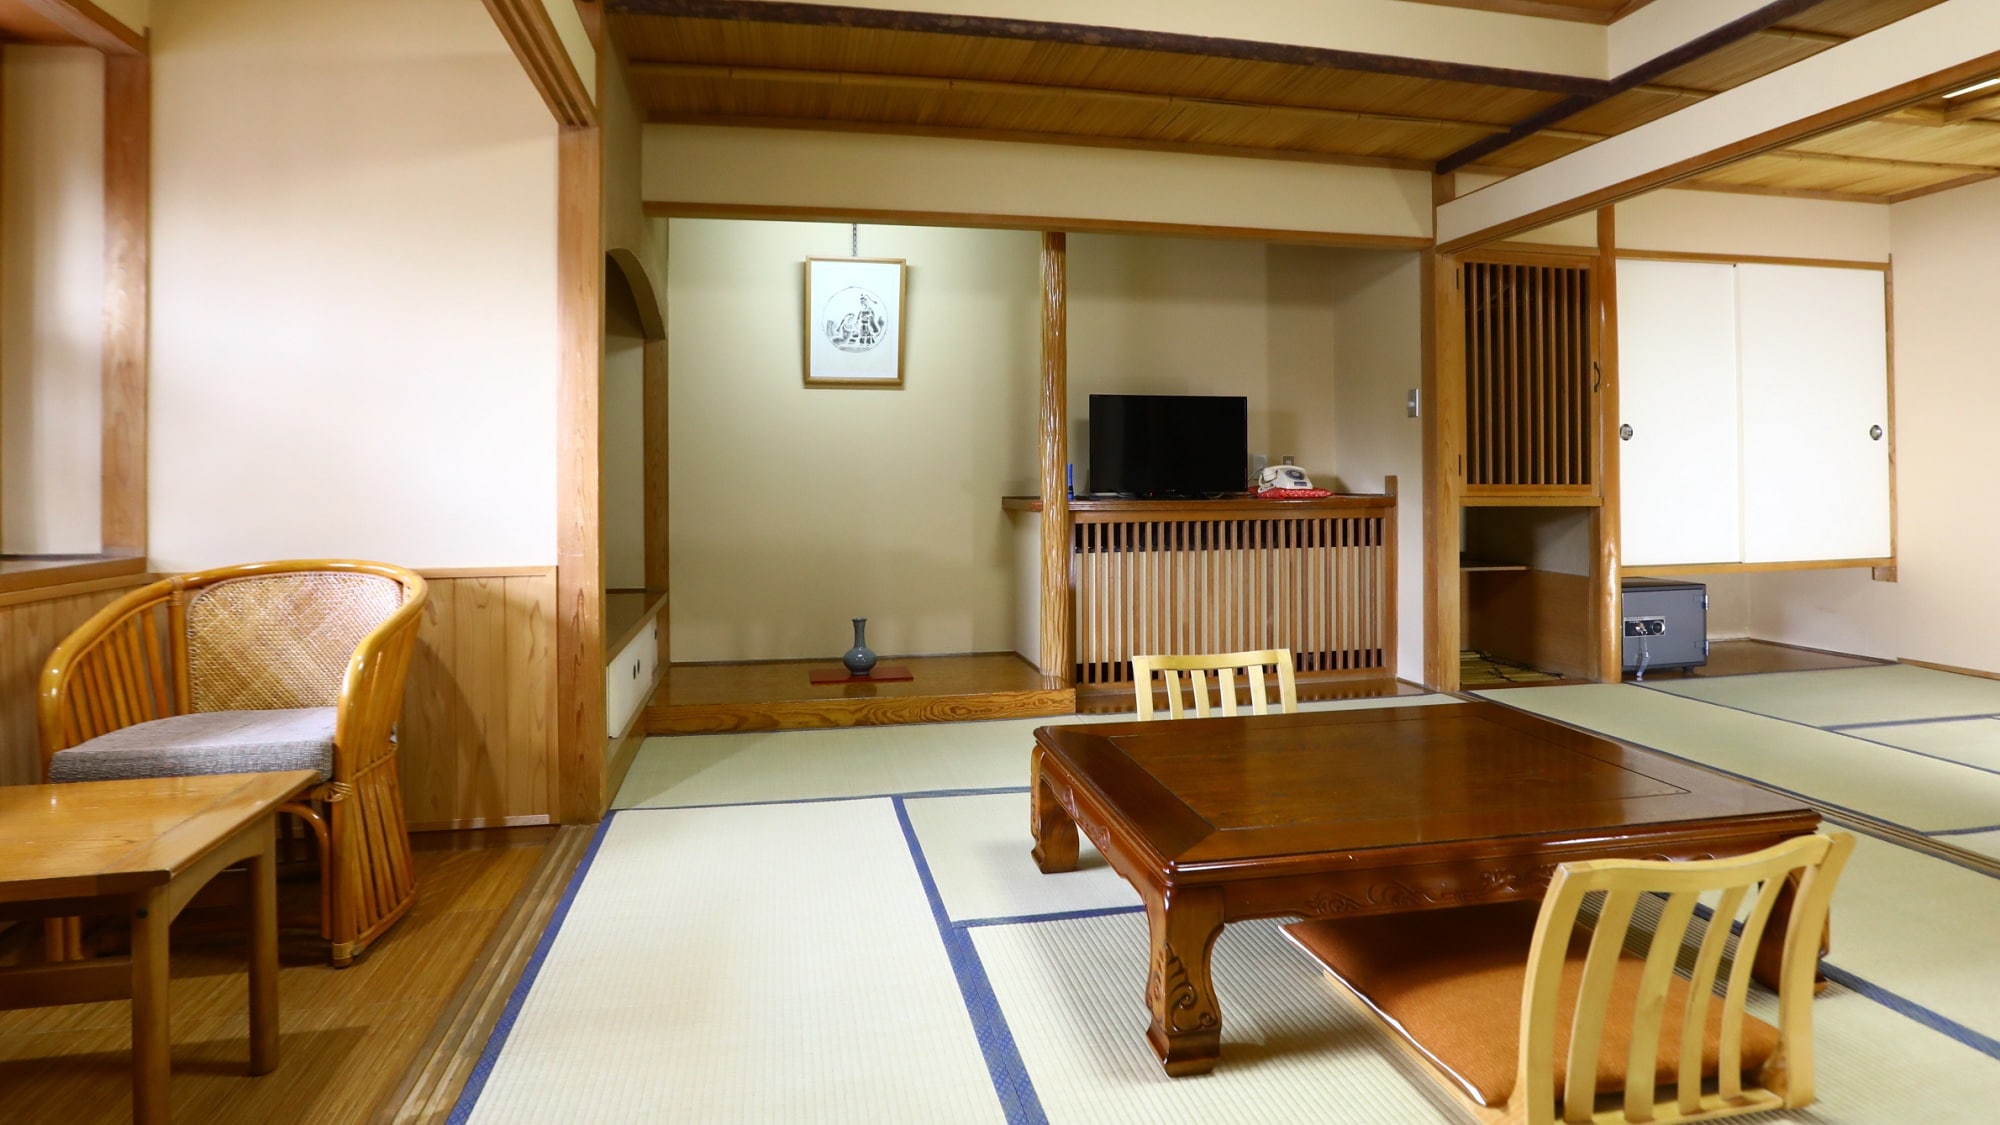 10 tatami mats + 4.5 tatami mats for two consecutive rooms + wide edge [A type]